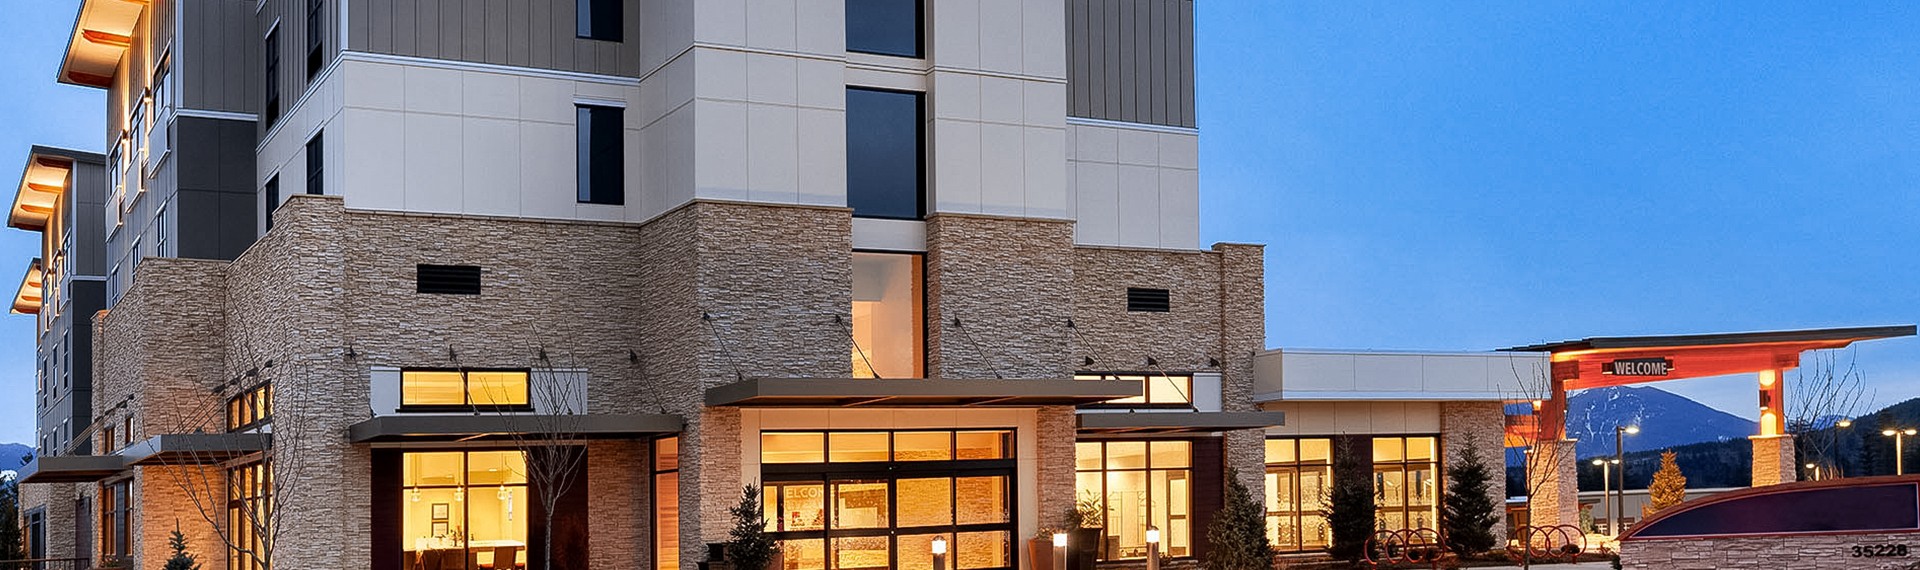 the exterior of the hotel at dusk